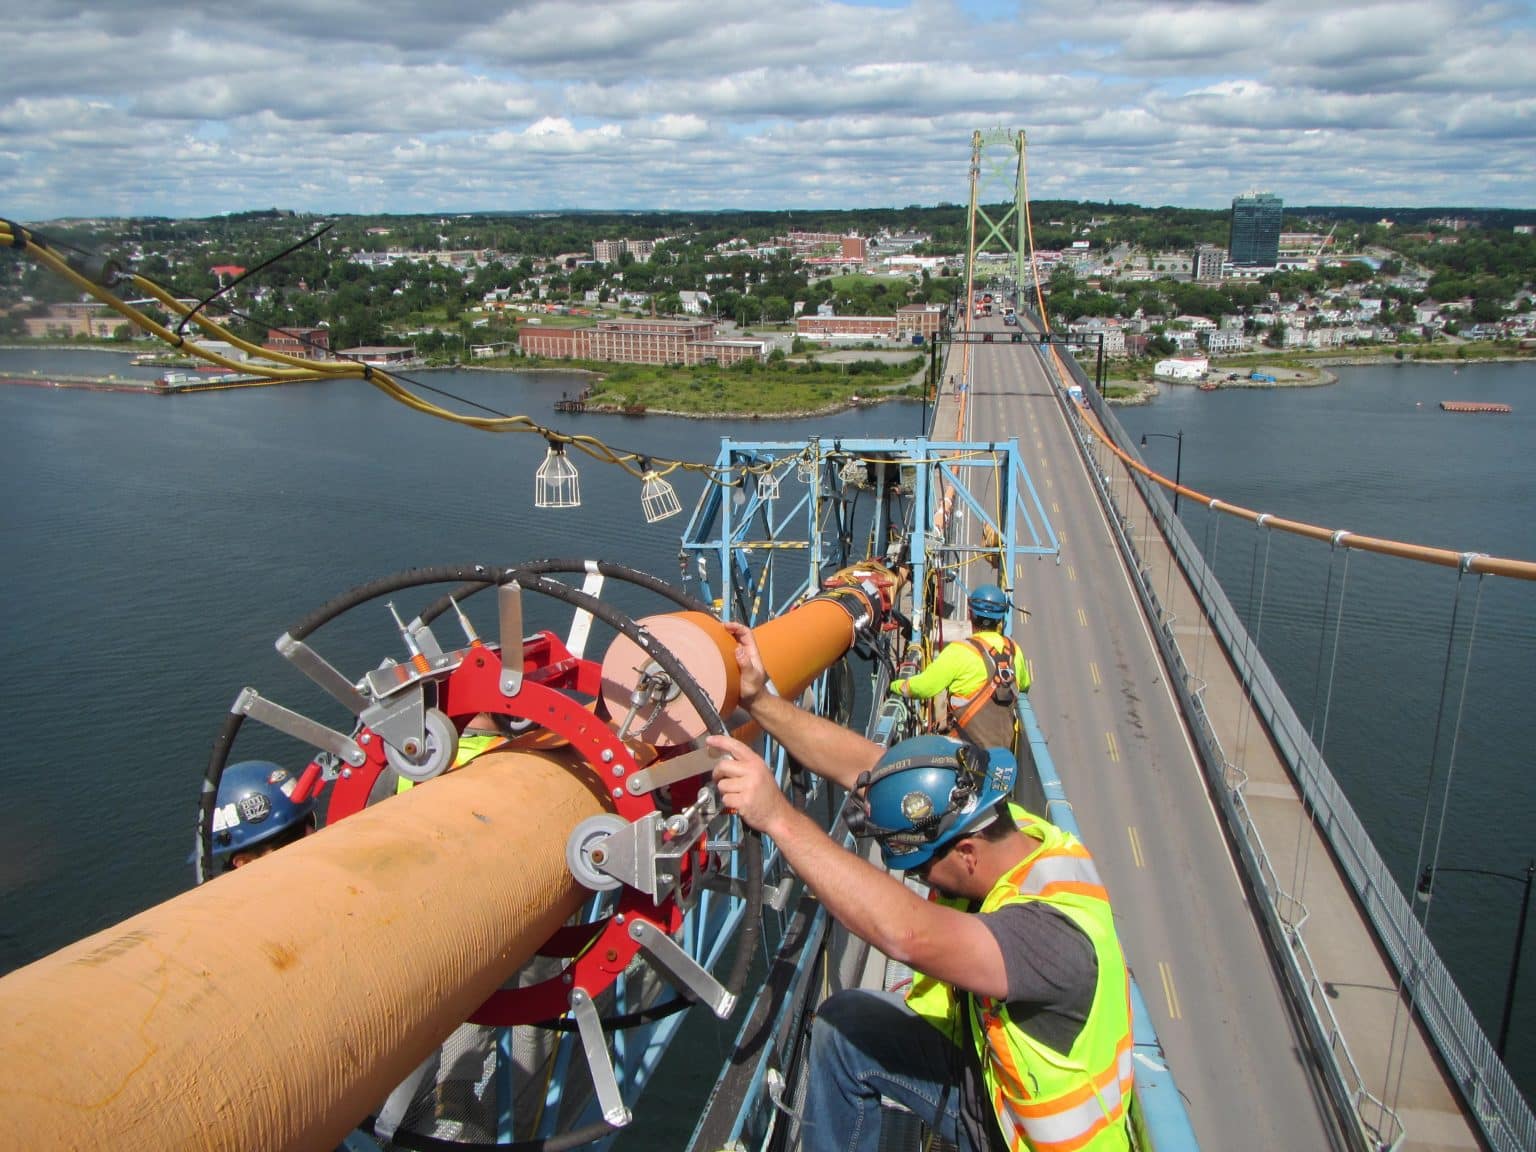 A worker installs a dehumidification device on one of the cables on the Macdonald Bridge.